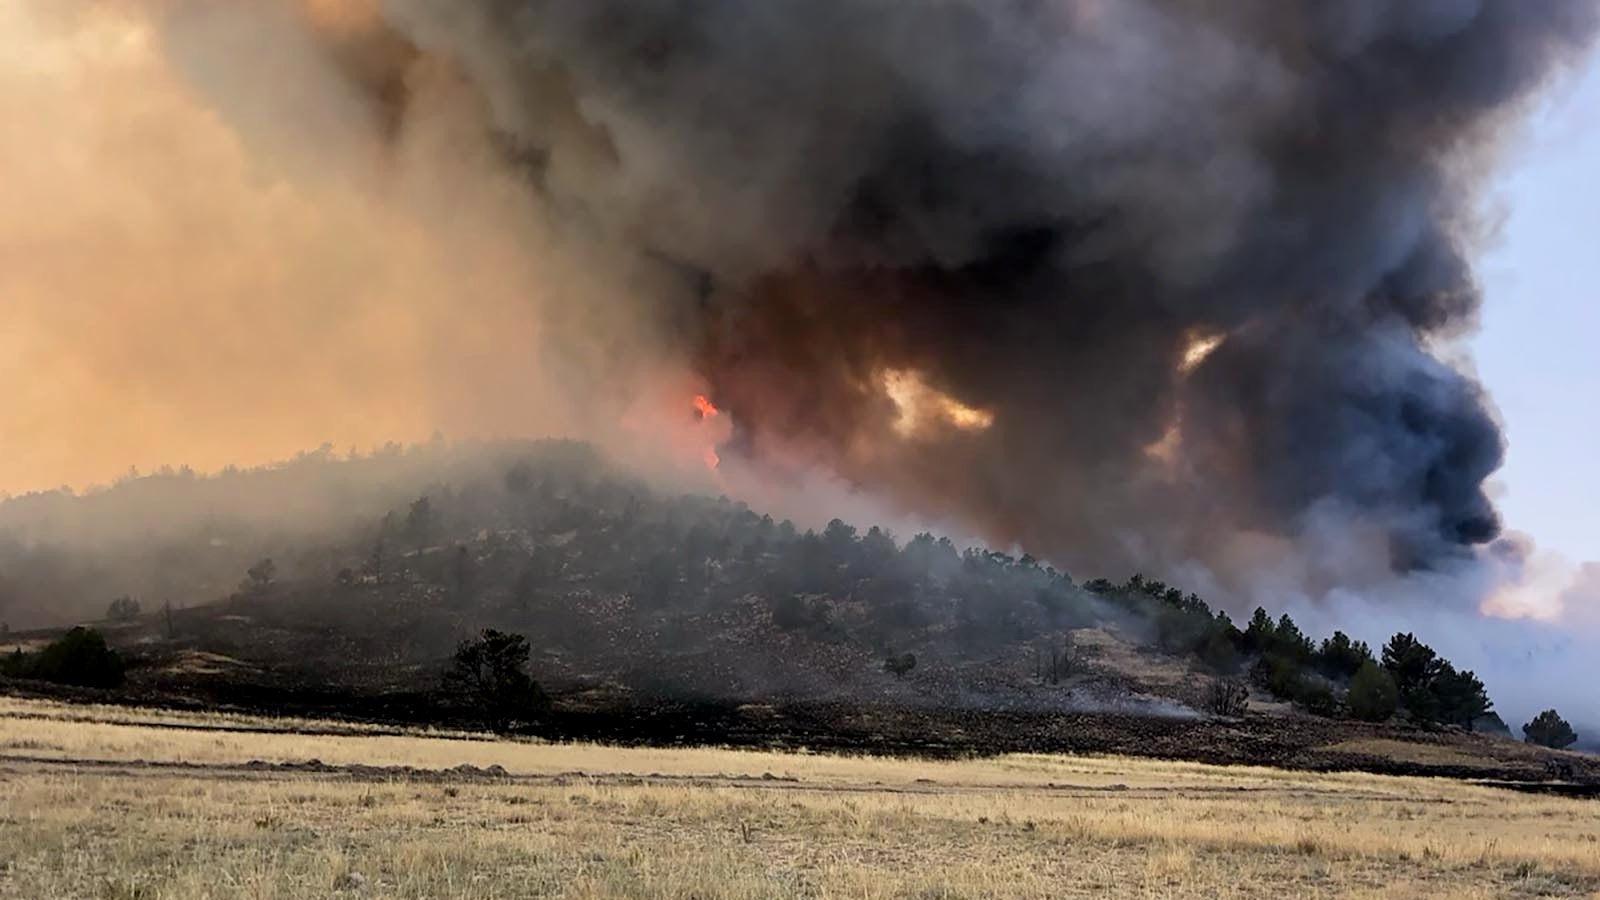 U.S. Rep. Harriet Hageman, R-Wyoming, grew up in an old homestead house near McGinnis Pass, located about 8 miles north of Guernsey, Wyoming. The century old home burned down on Wednesday. Fire from behind the home burns closer.